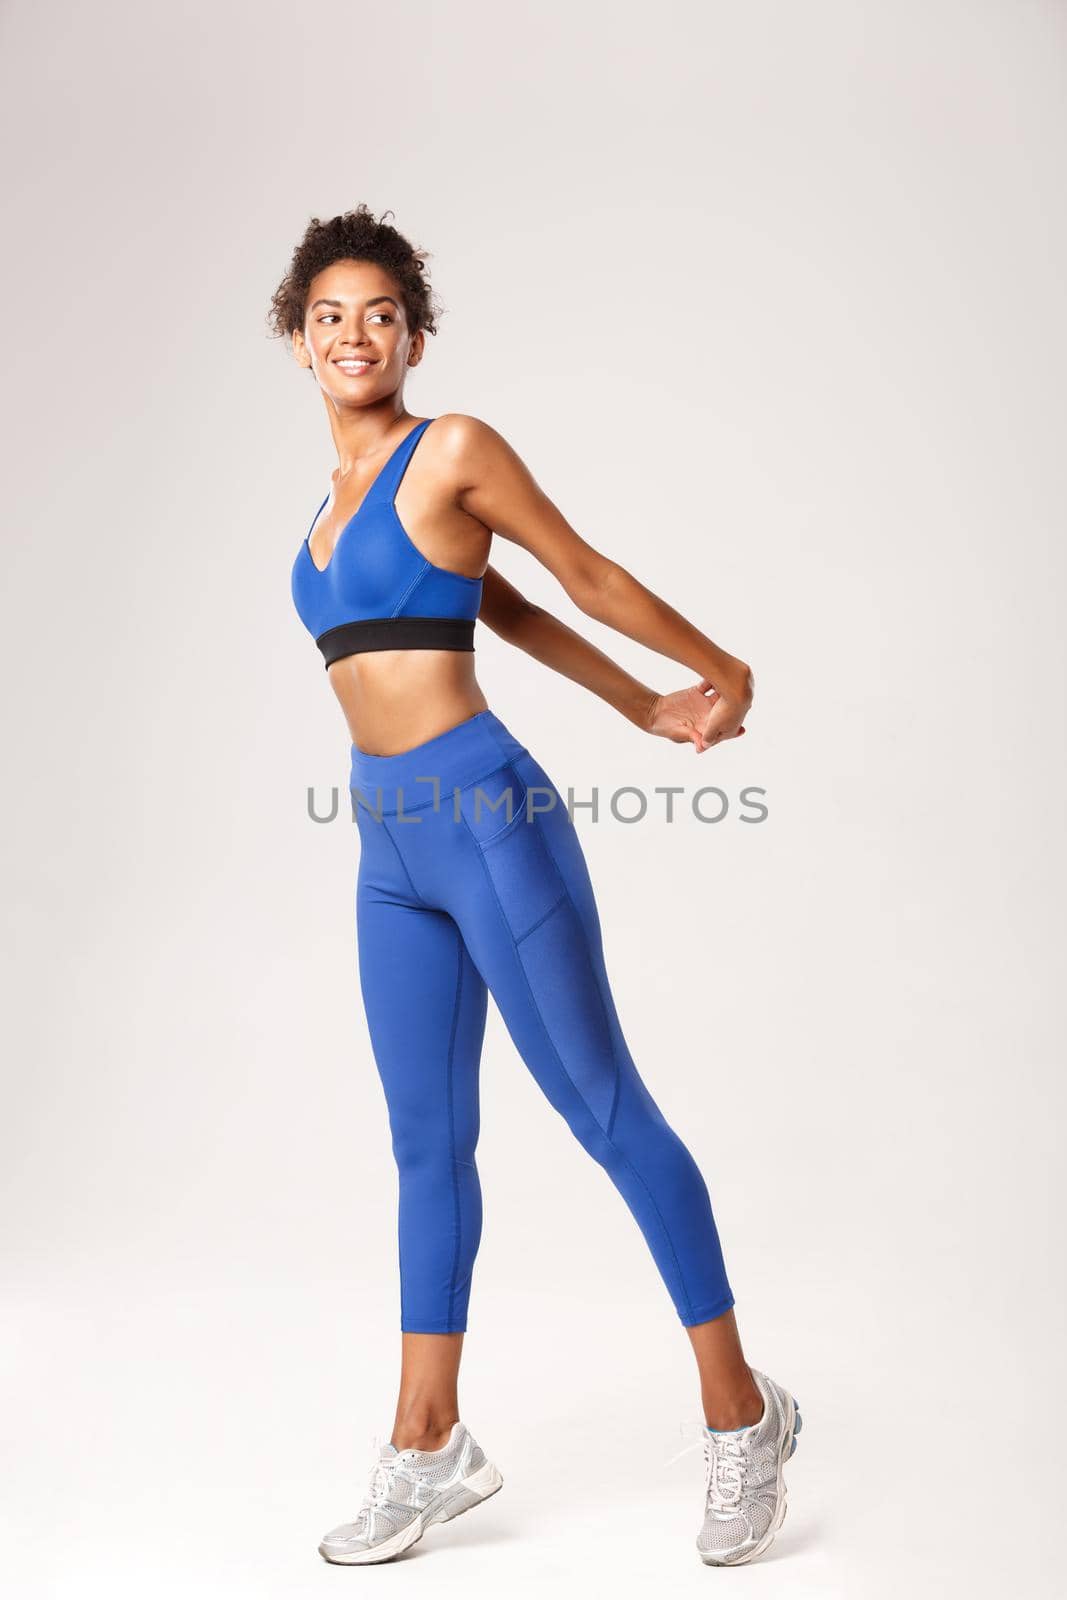 Full length of smiling african-american sportswoman in blue sport outfit, stretching before workout, looking right, standing over white background.